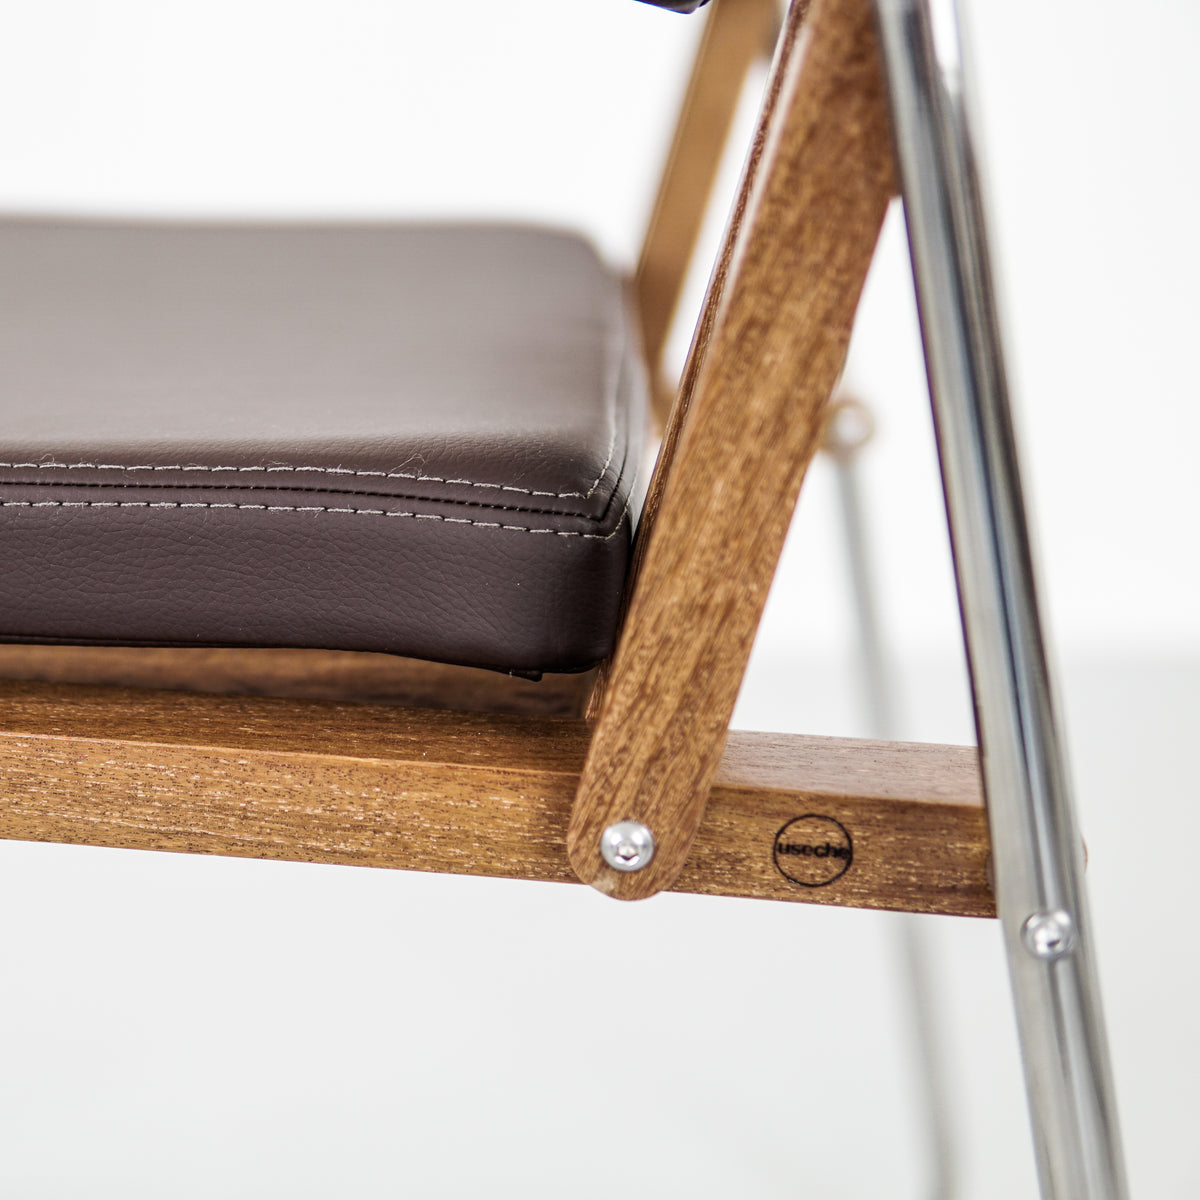 Leather Chair with Stainless Steel and Wood | Brown and Sand colors | RIPA Chair | Pedro Useche